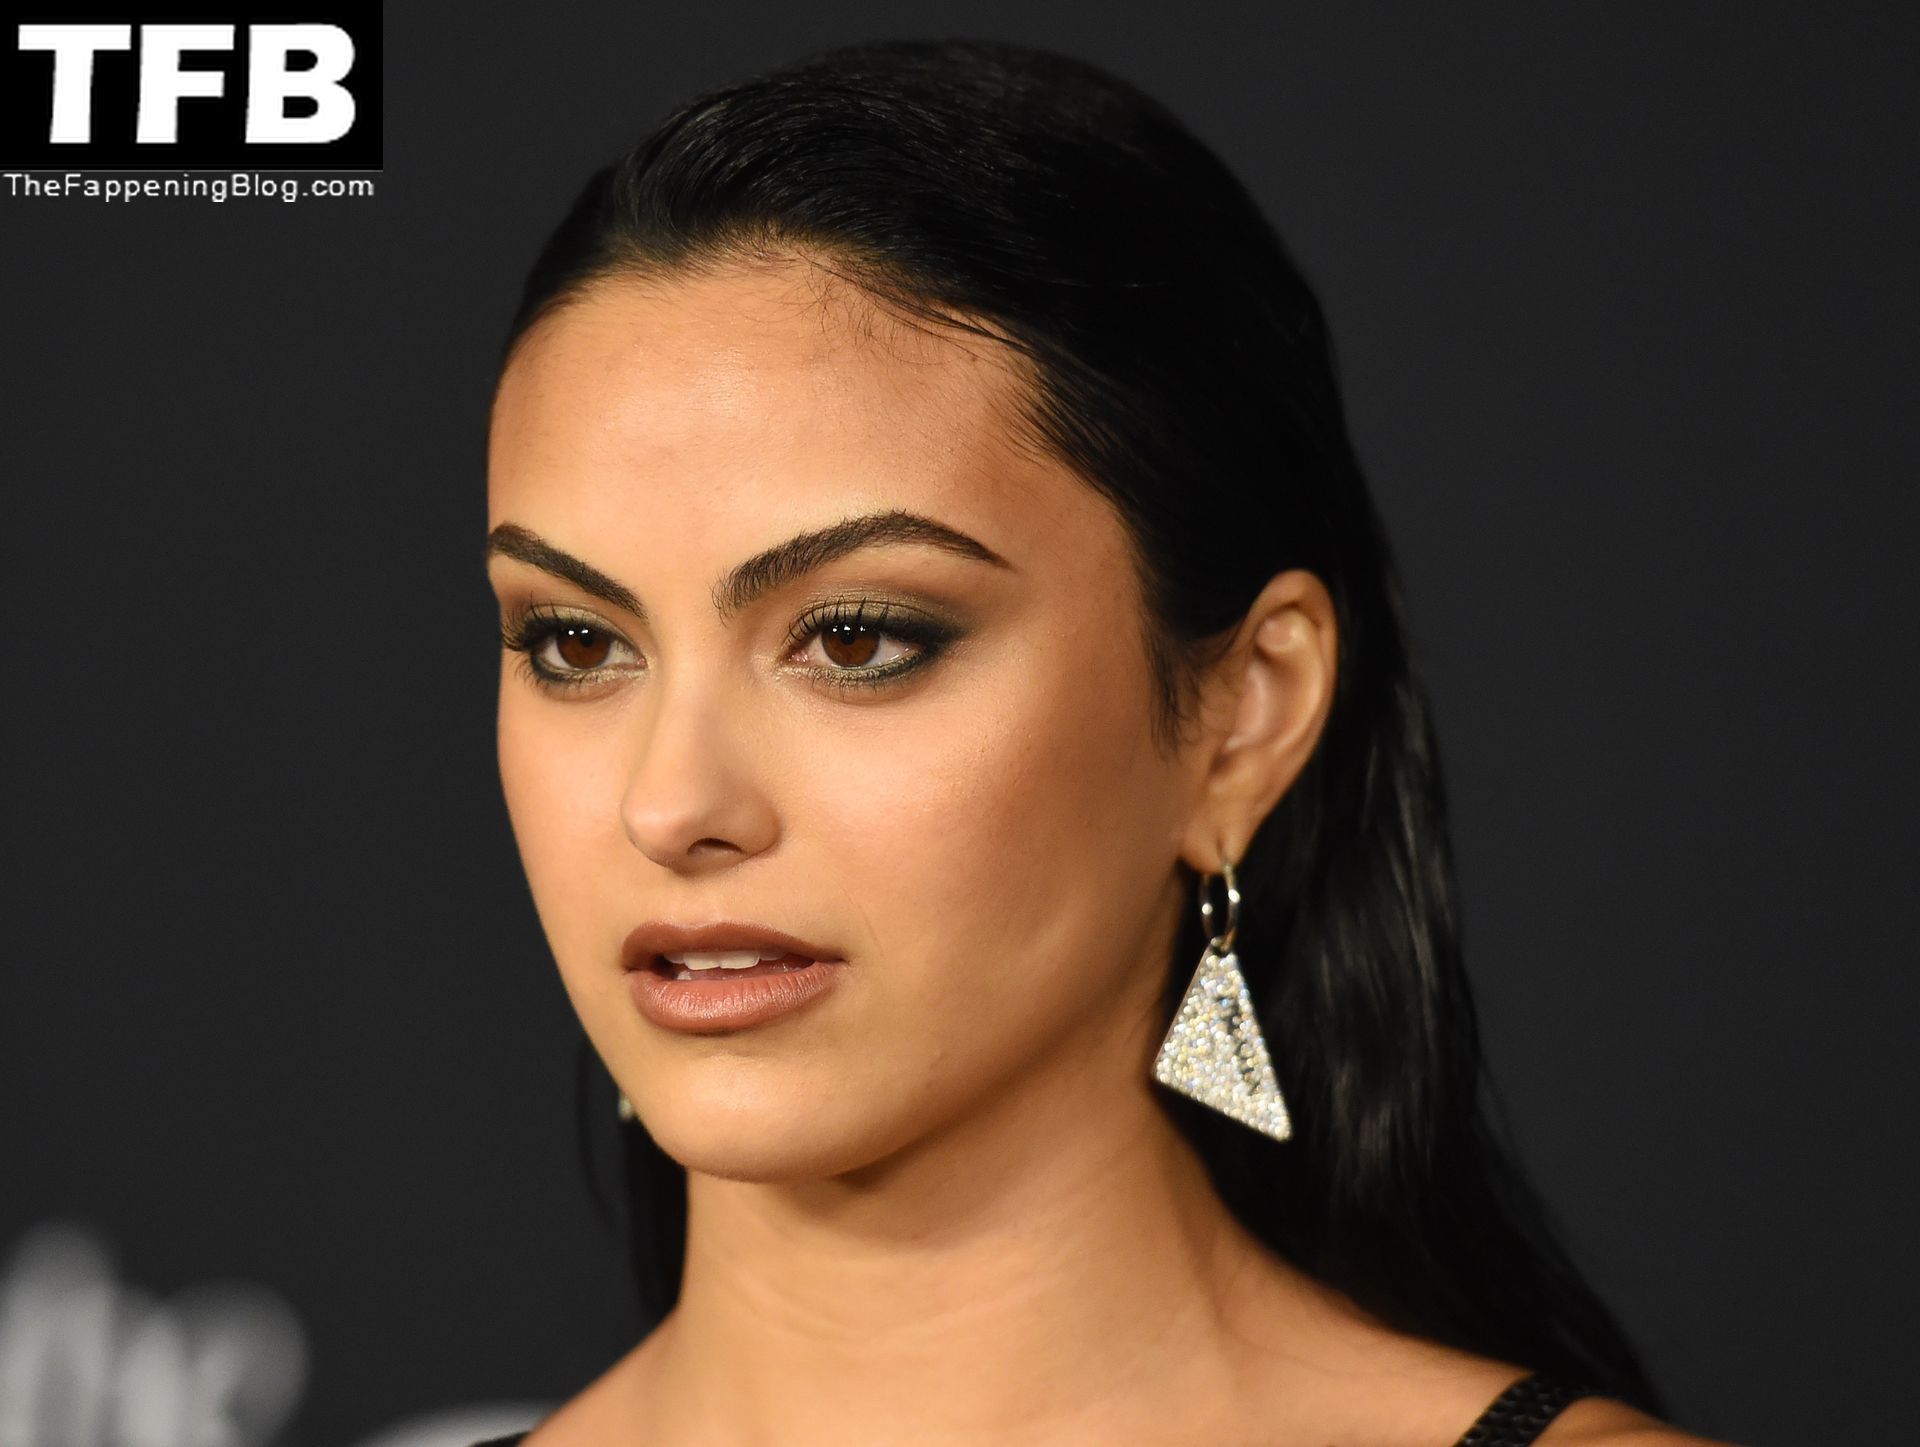 Camila-Mendes-See-Through-Tits-The-Fappening-Blog-69.jpg